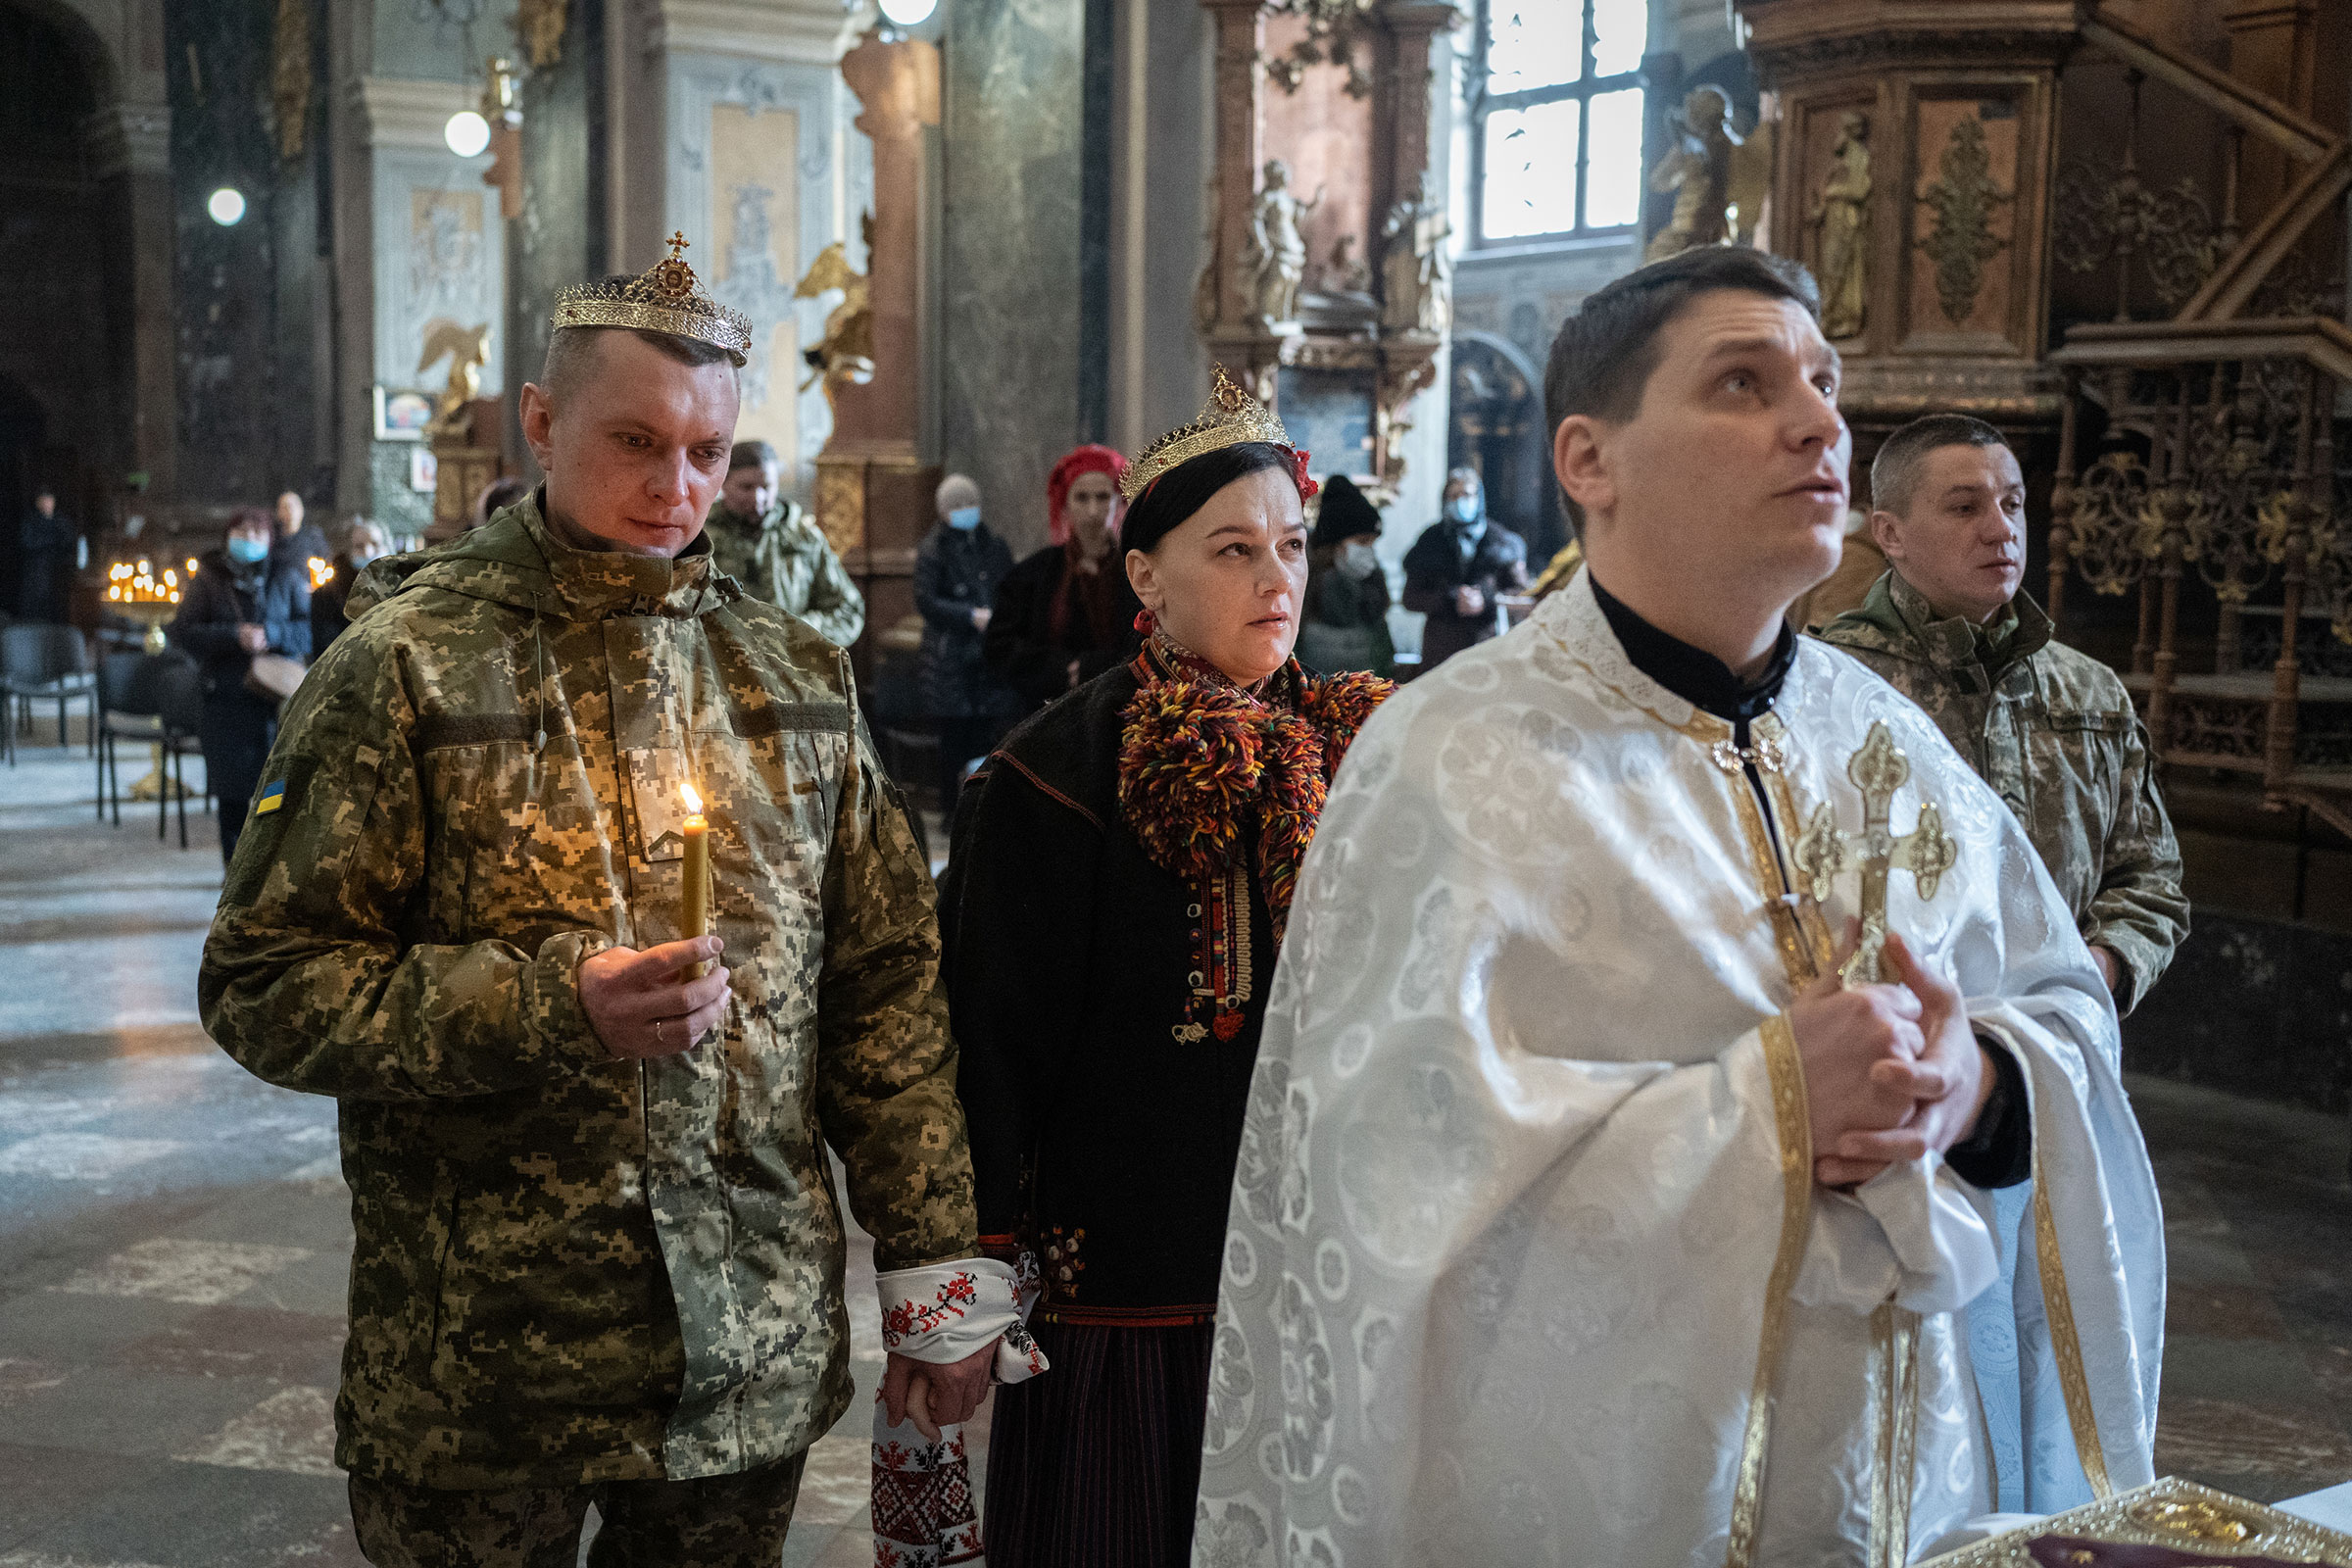 Roman, 33, soldier of the 103 Brigade of the Armed Forces of Ukraine, marries Iryna, 37, in the Garrison Temple in Lviv, on March 1. They also baptized their child, Solomiya. (Serhii Korovainyi)